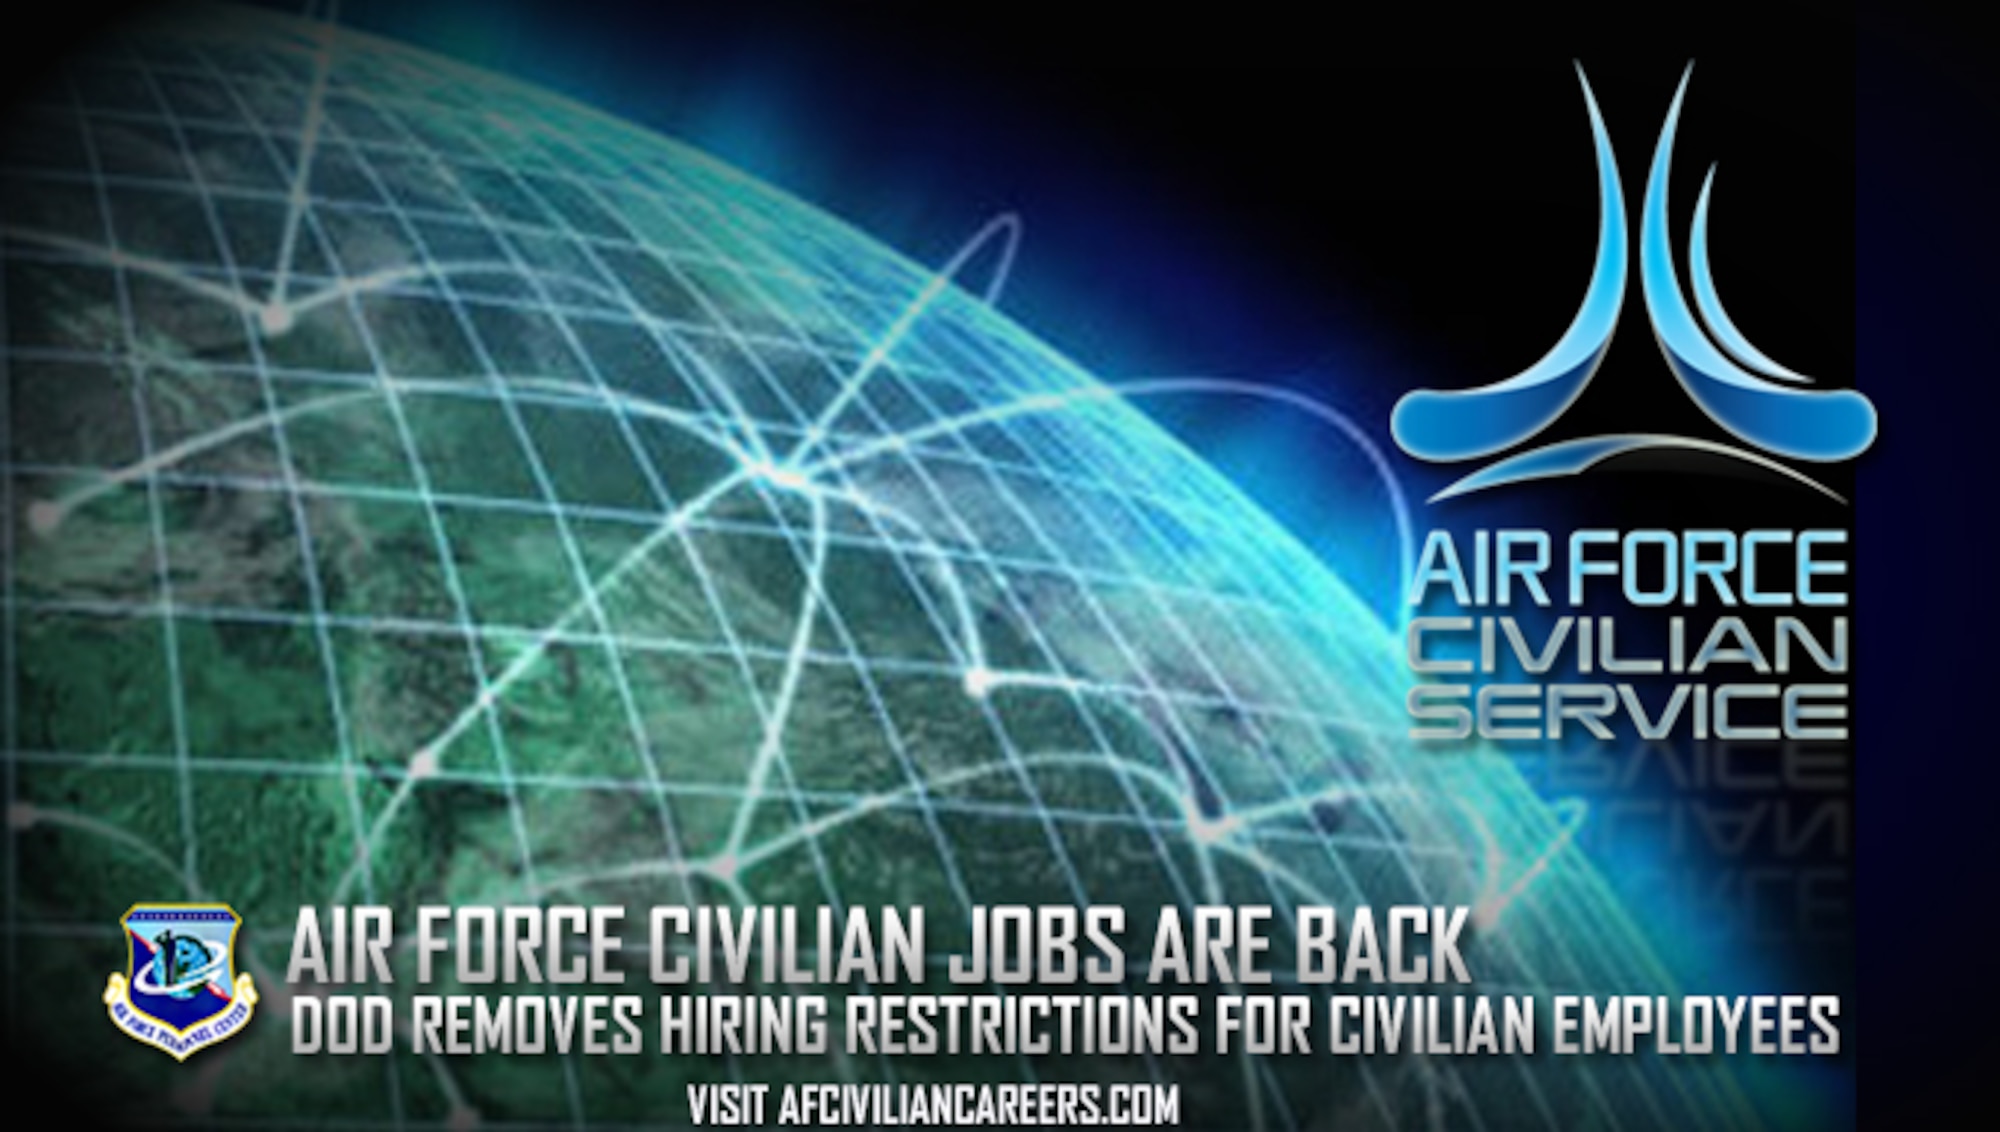 The Air Force Personnel Center is partnering with customers with the goal of resuming normal “first-in, first-out” operations since the end of the government-wide hiring freeze in April 2017. (U.S. Air Force courtesy graphic)